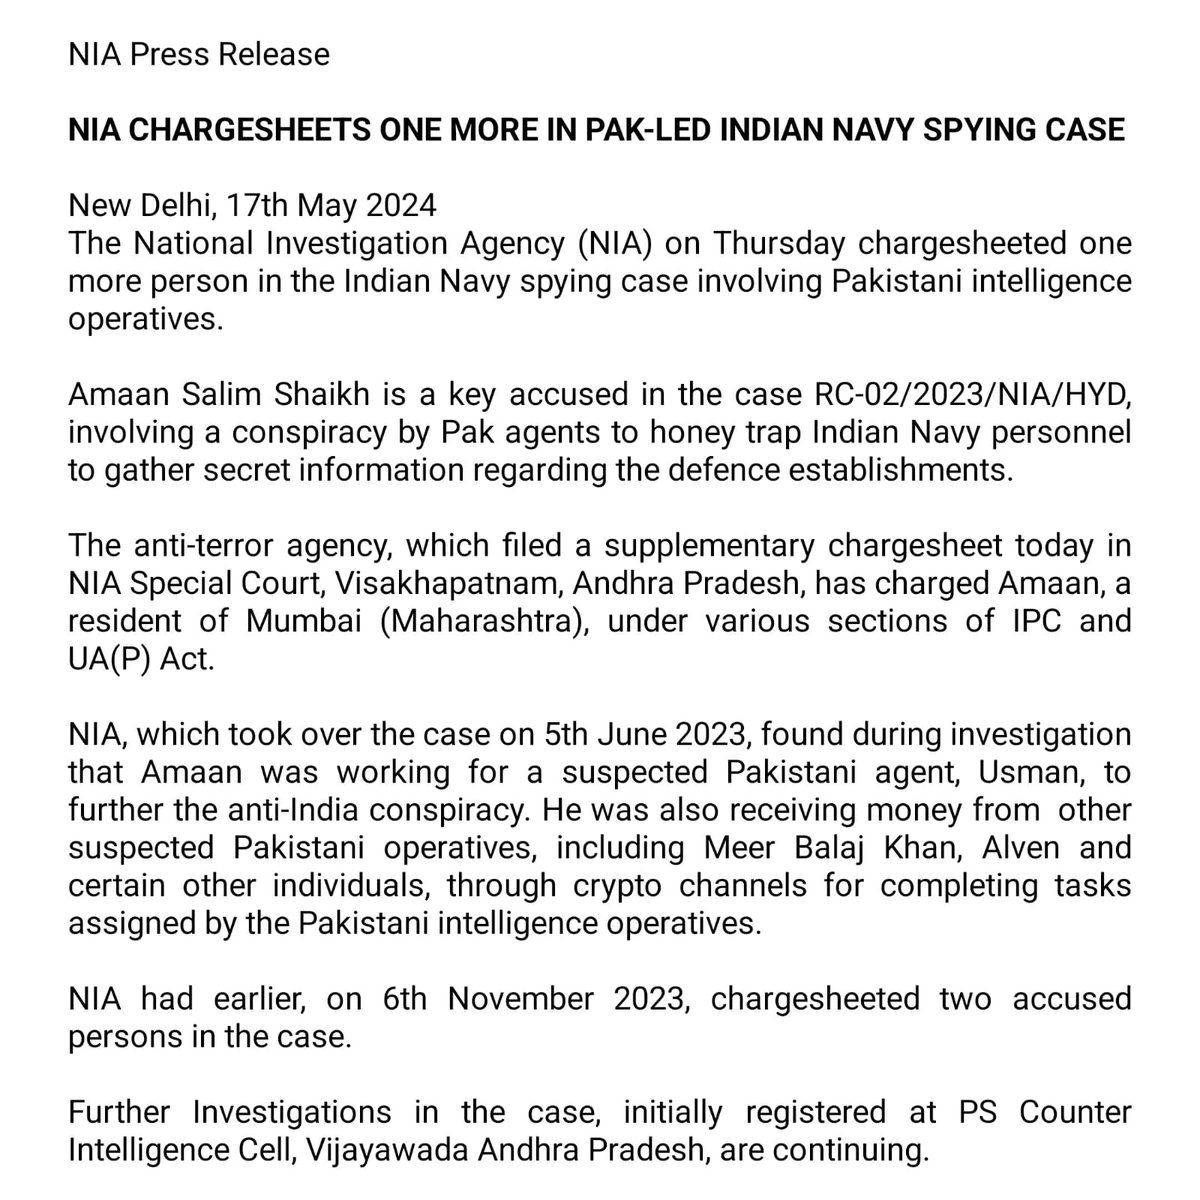 NIA Chargesheets one More in Pak-Led Indian Navy Spying Case